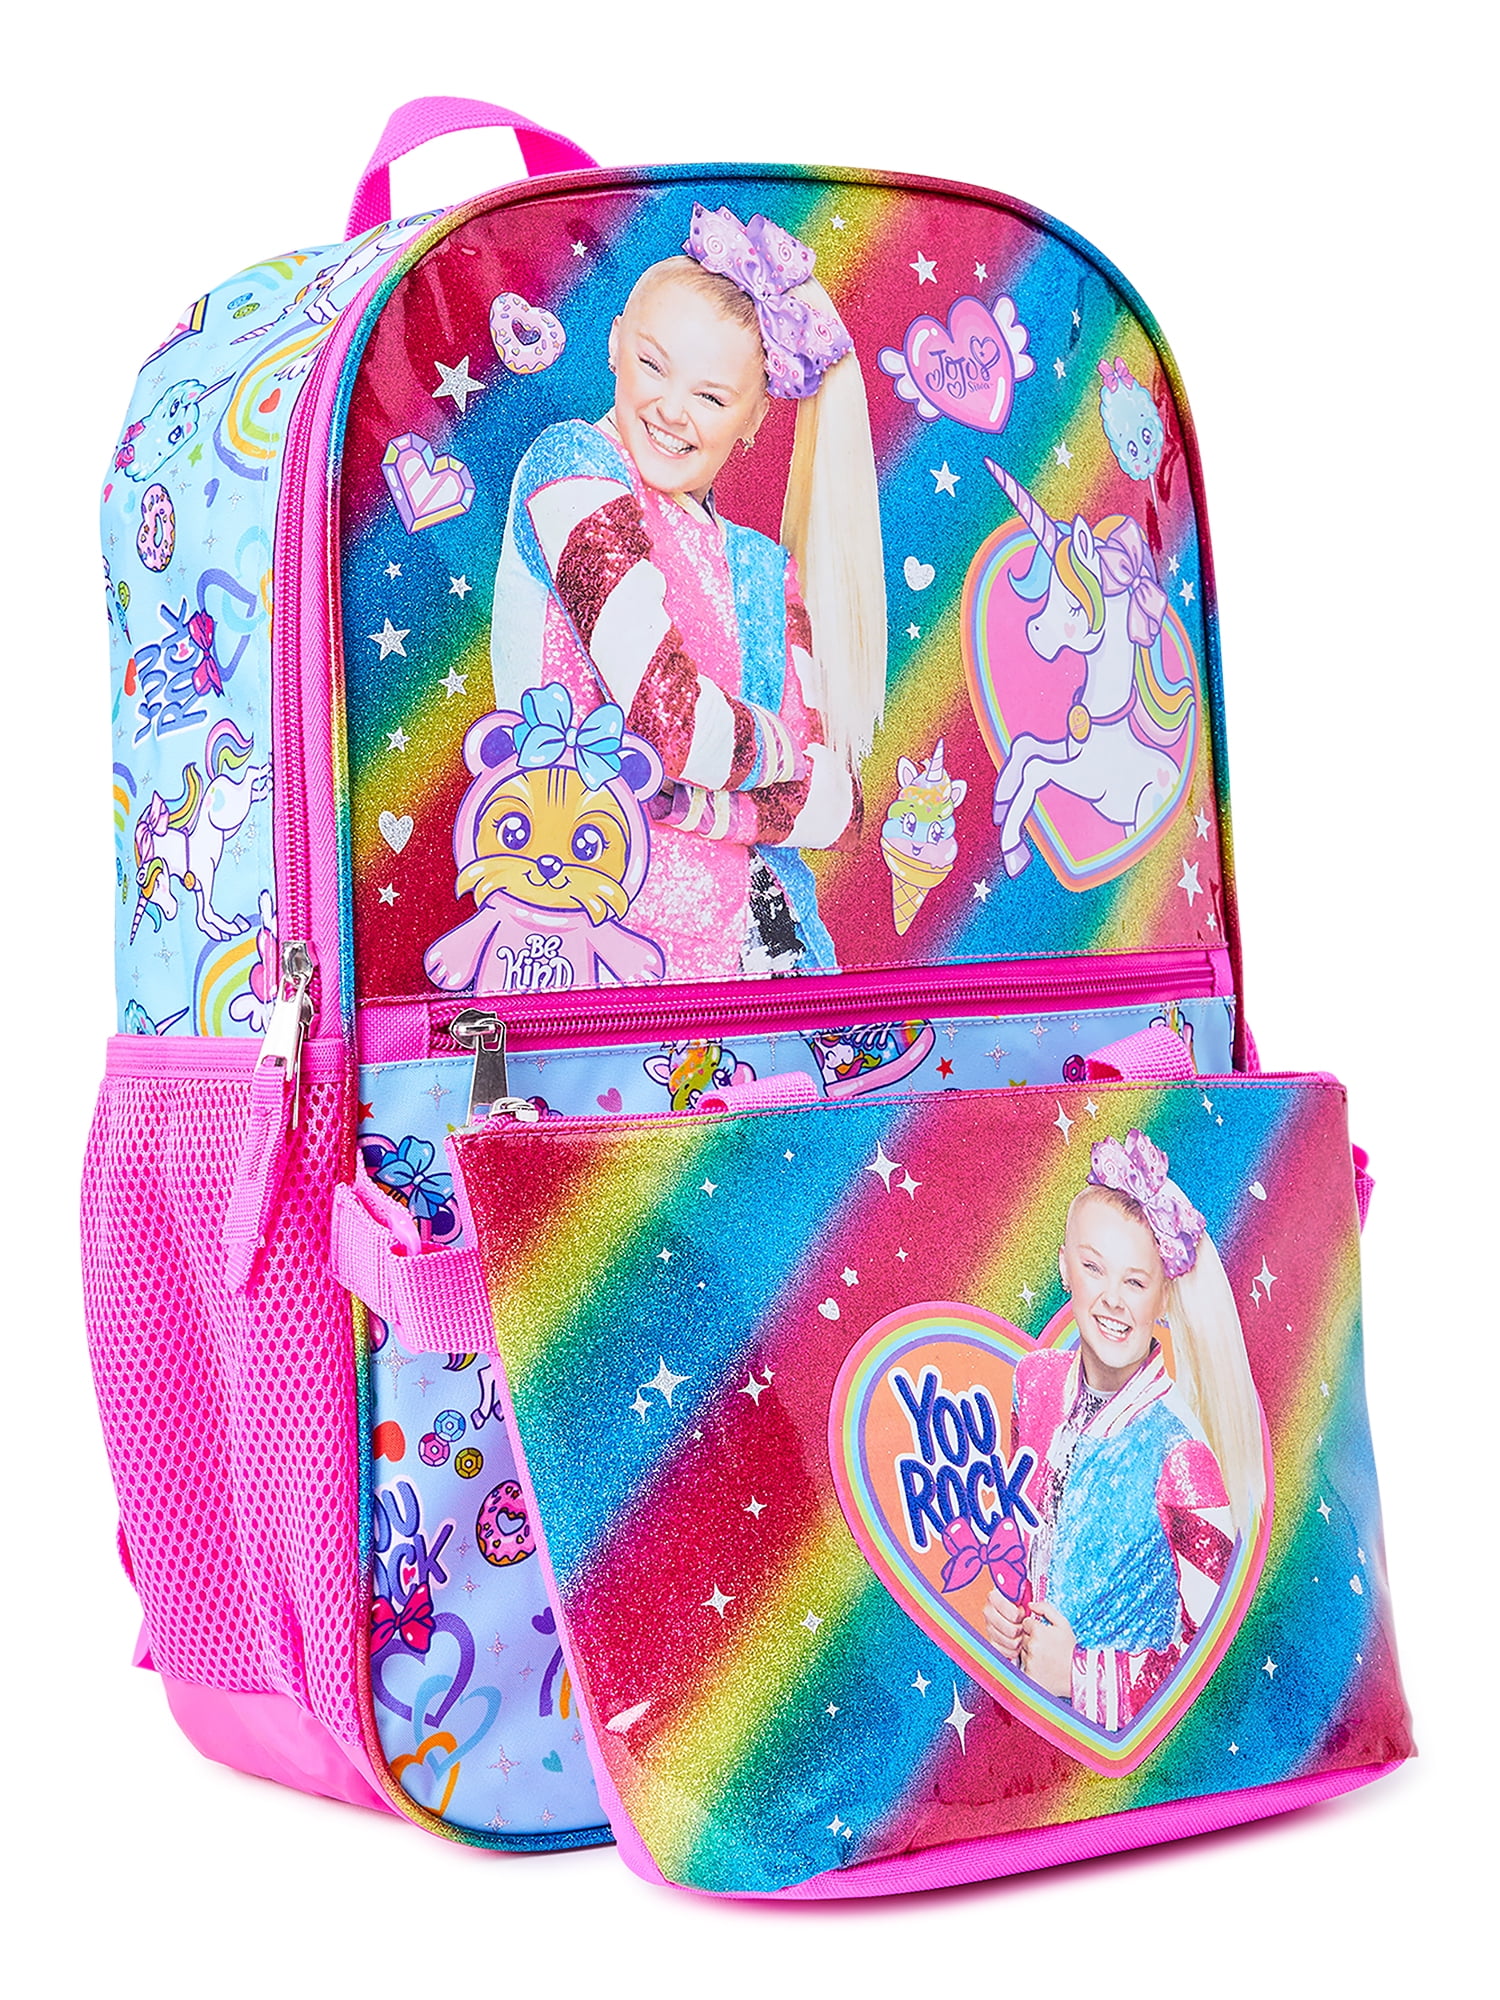 Jojo Siwa Rockin Rainbow Girls 17" Laptop Backpack 2-Piece Set with Lunch Tote Bag, Pink Multi-Color